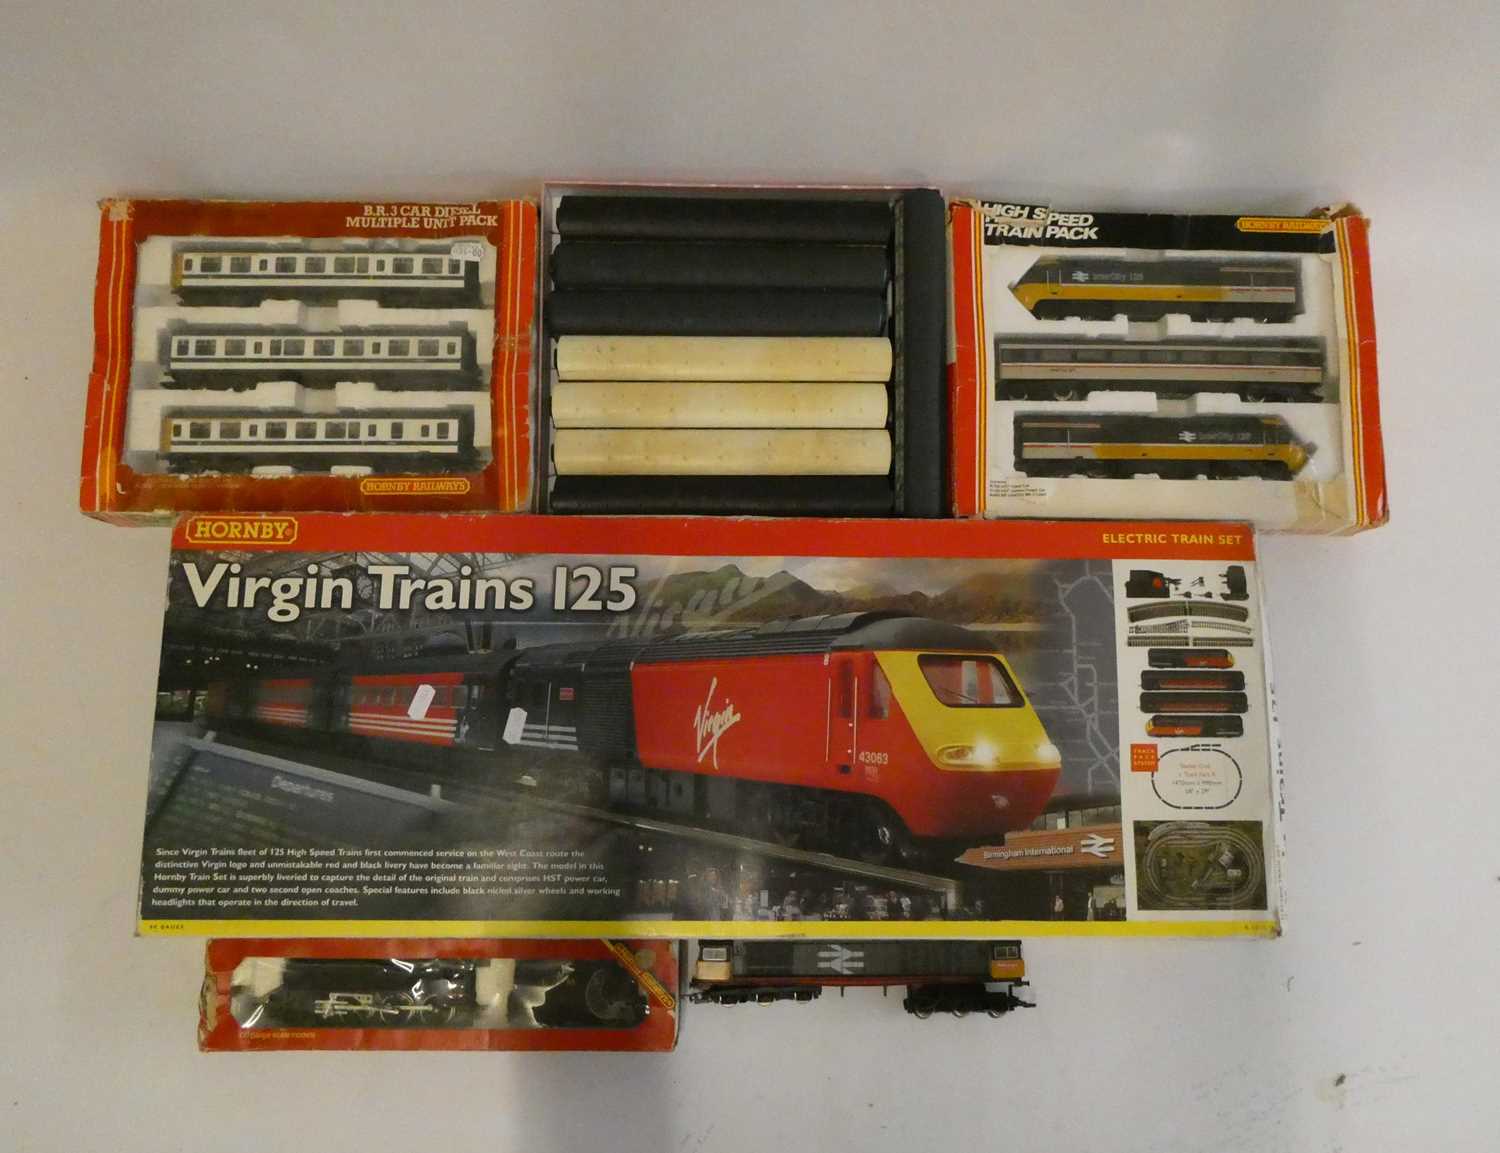 Hornby Margate rolling stock including Intercity 125 LM, MS, Black 5, three car diesel unit and